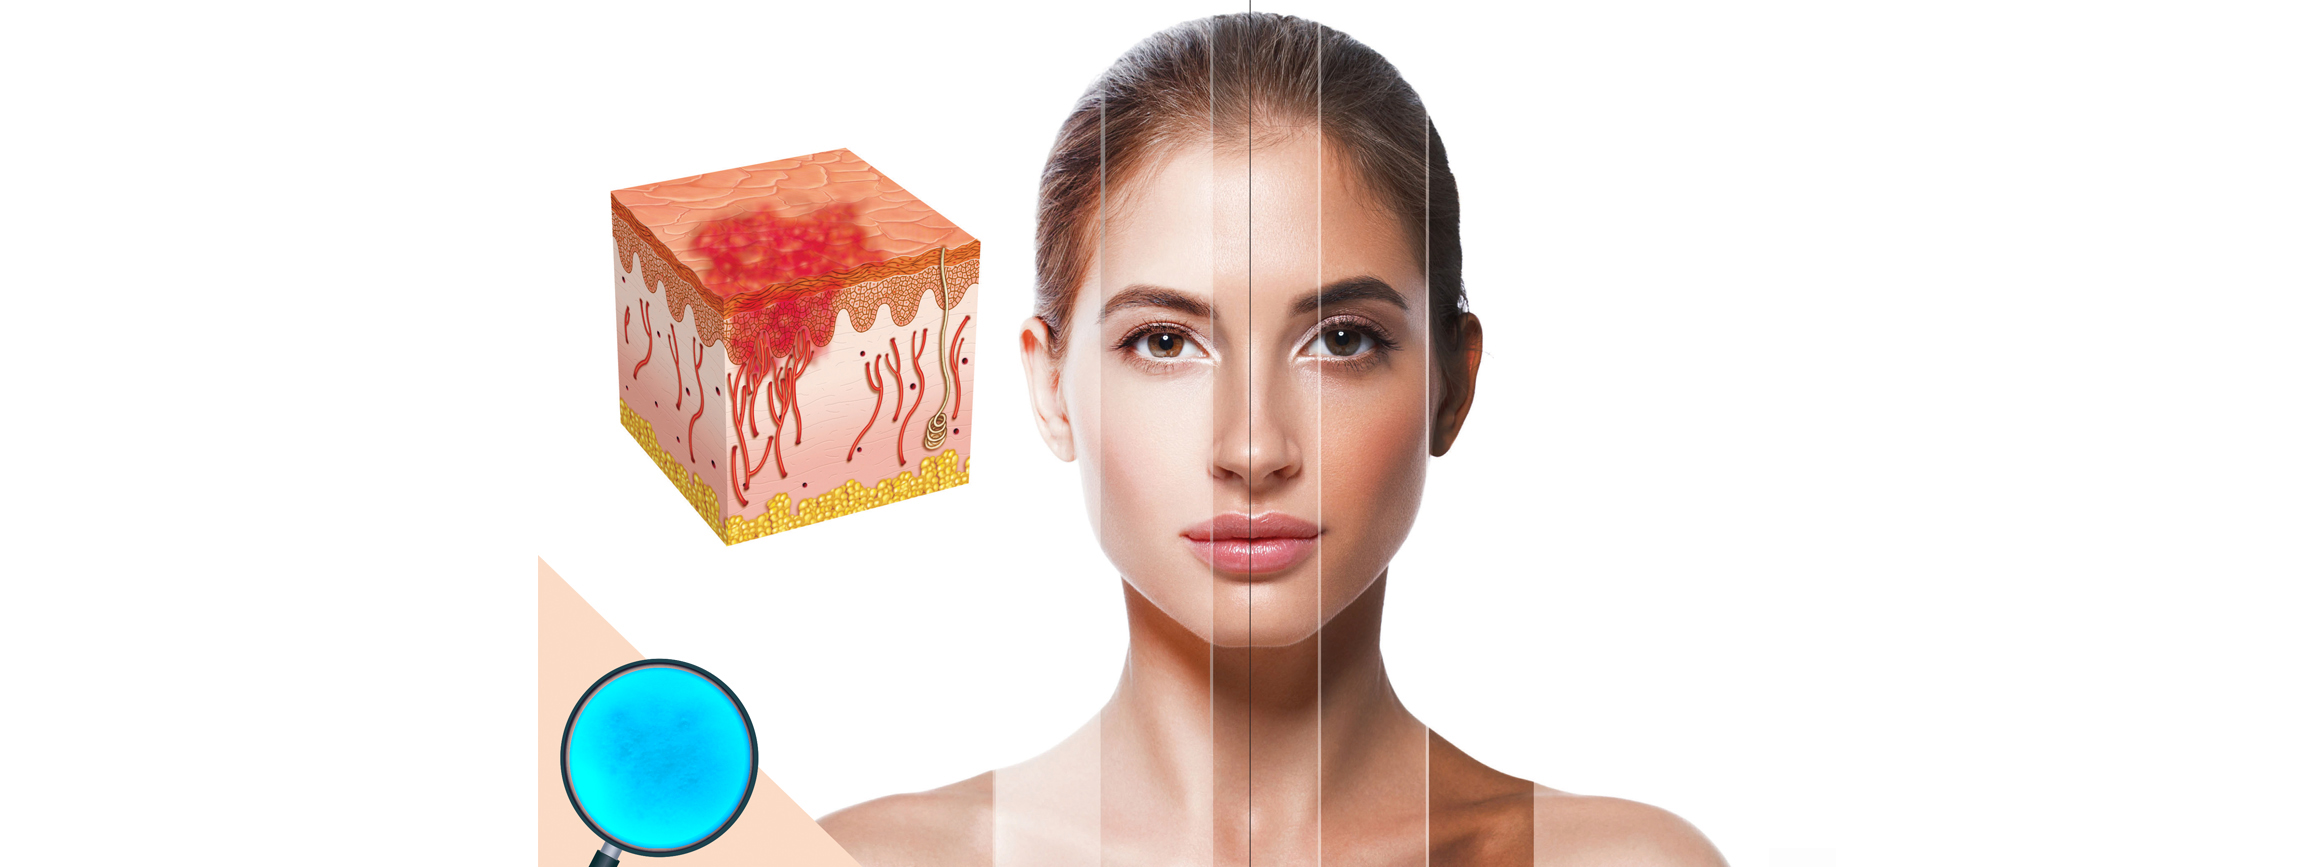 What are the symptoms of rosacea?